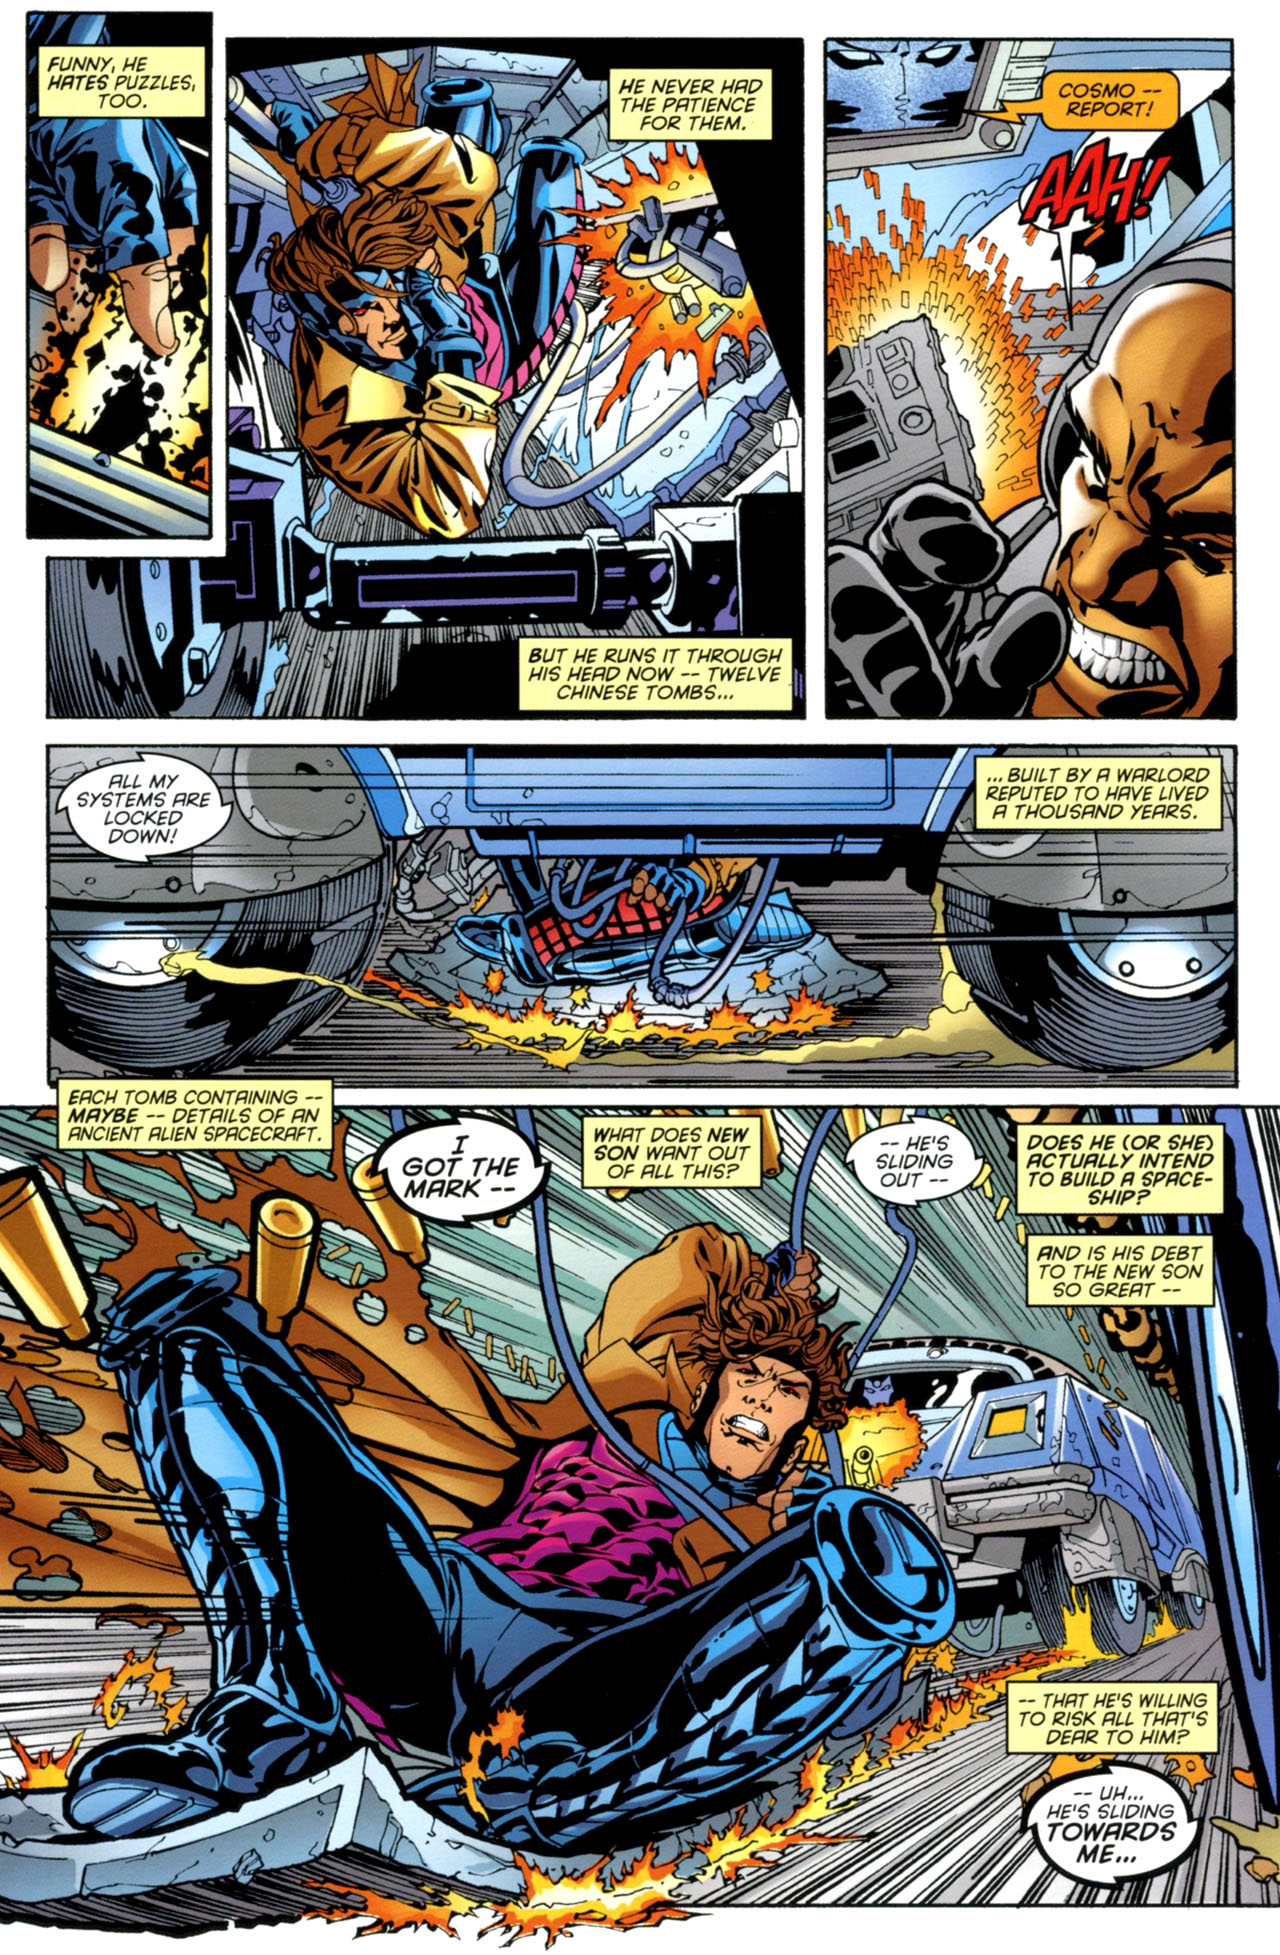 Gambit (1999) issue 1 (Marvel Authentix) - Page 32